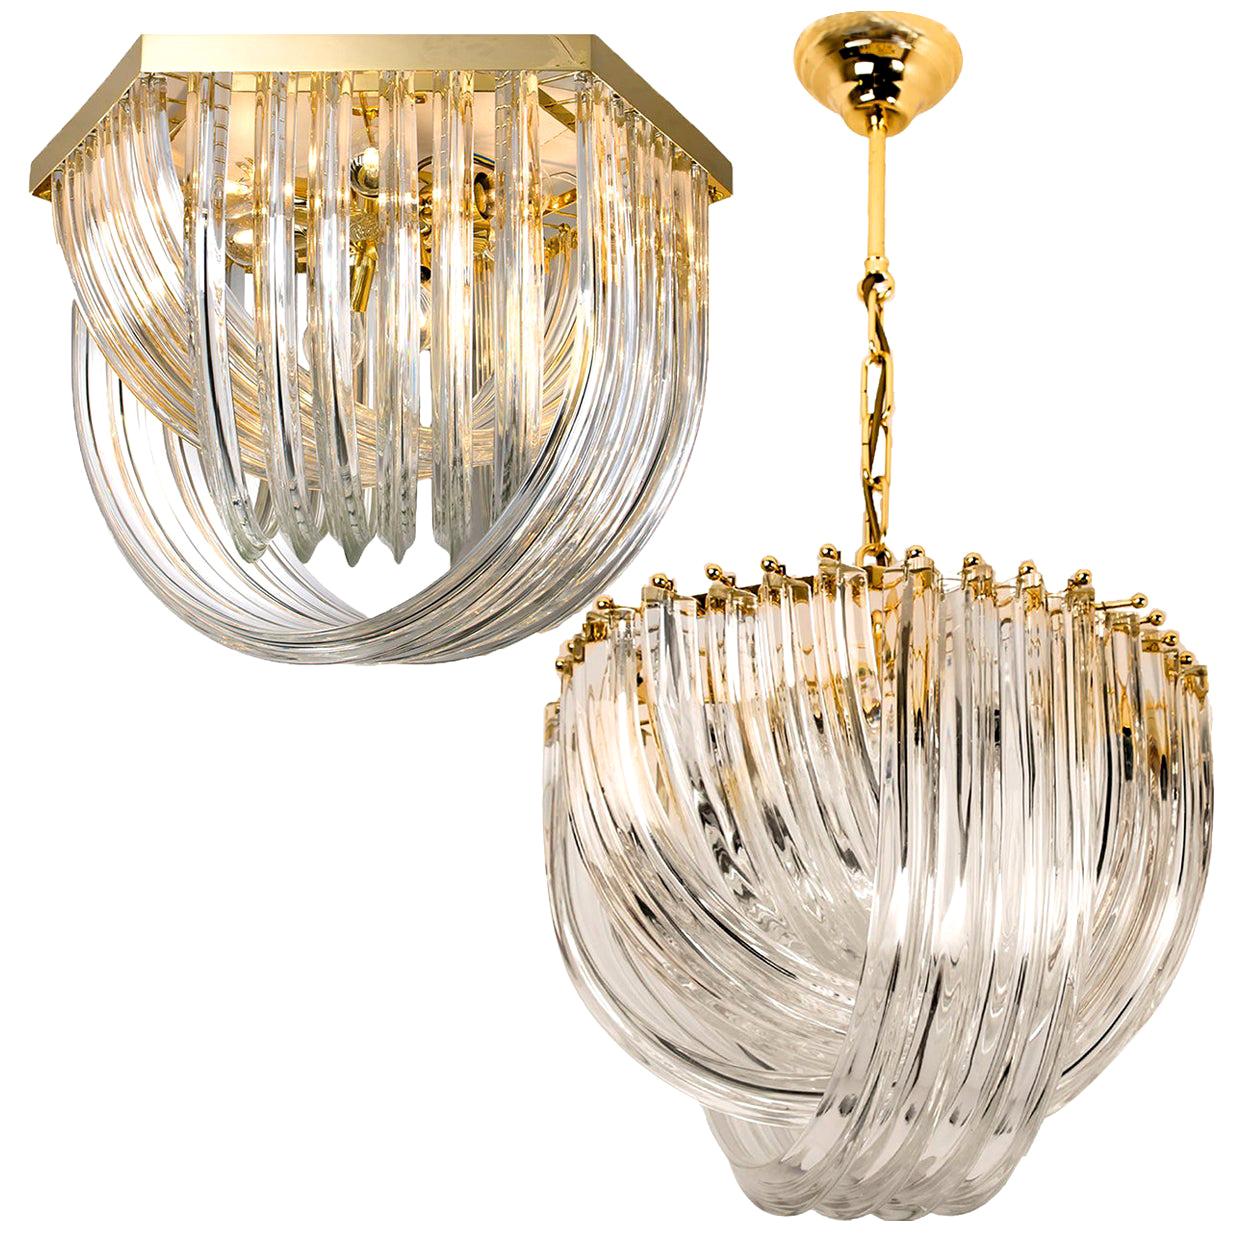 Pair of Venini Light Fixtures, Curved Crystal Glass and Gilt Brass, Italy